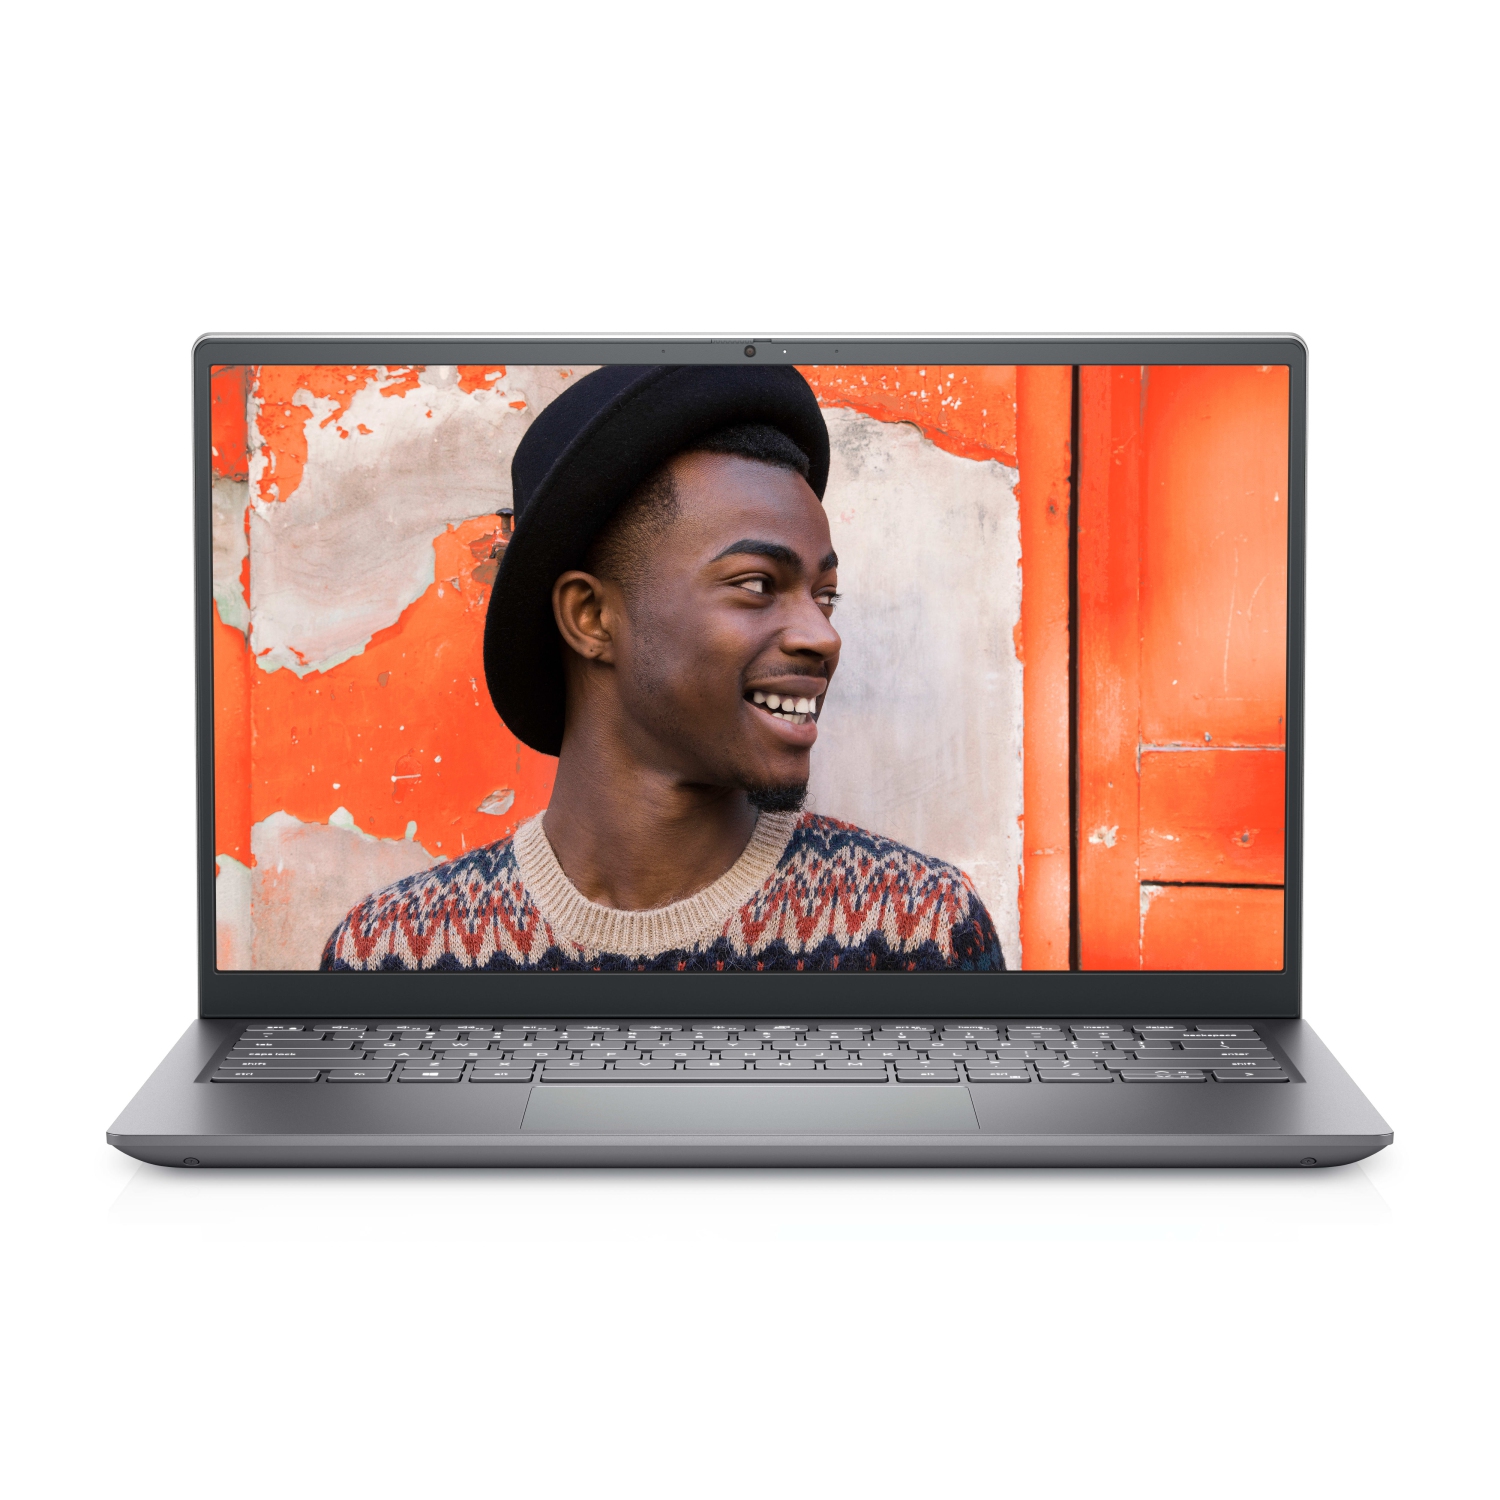 Refurbished (Excellent) – Dell Inspiron 5410 Laptop (2021) | 14" FHD | Core i7 - 512GB SSD - 16GB RAM | 4 Cores @ 4.8 GHz - 11th Gen CPU